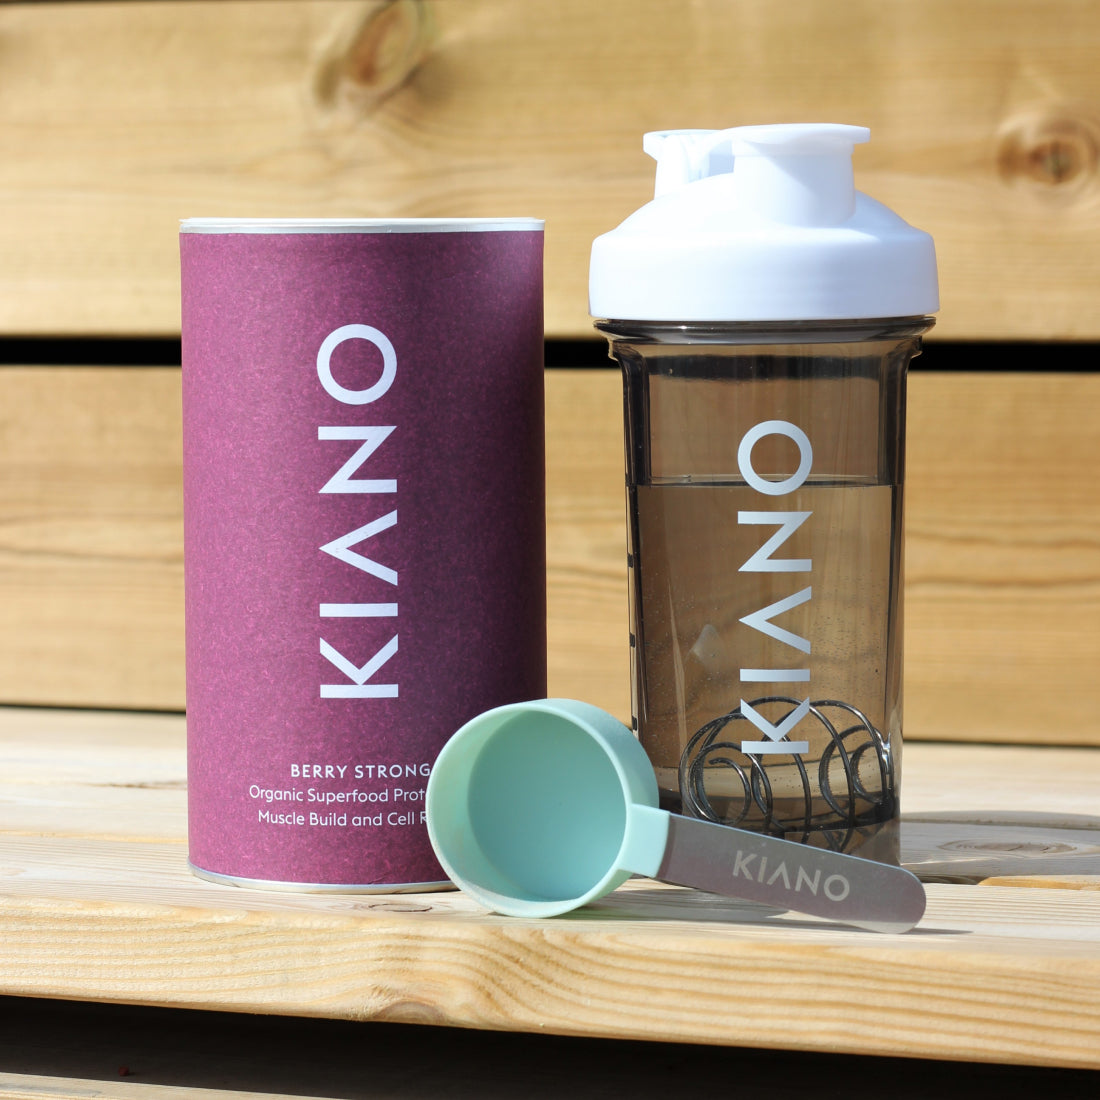 Delicious Berry-Flavored Protein Boost from KIANO for Fitness Enthusiasts